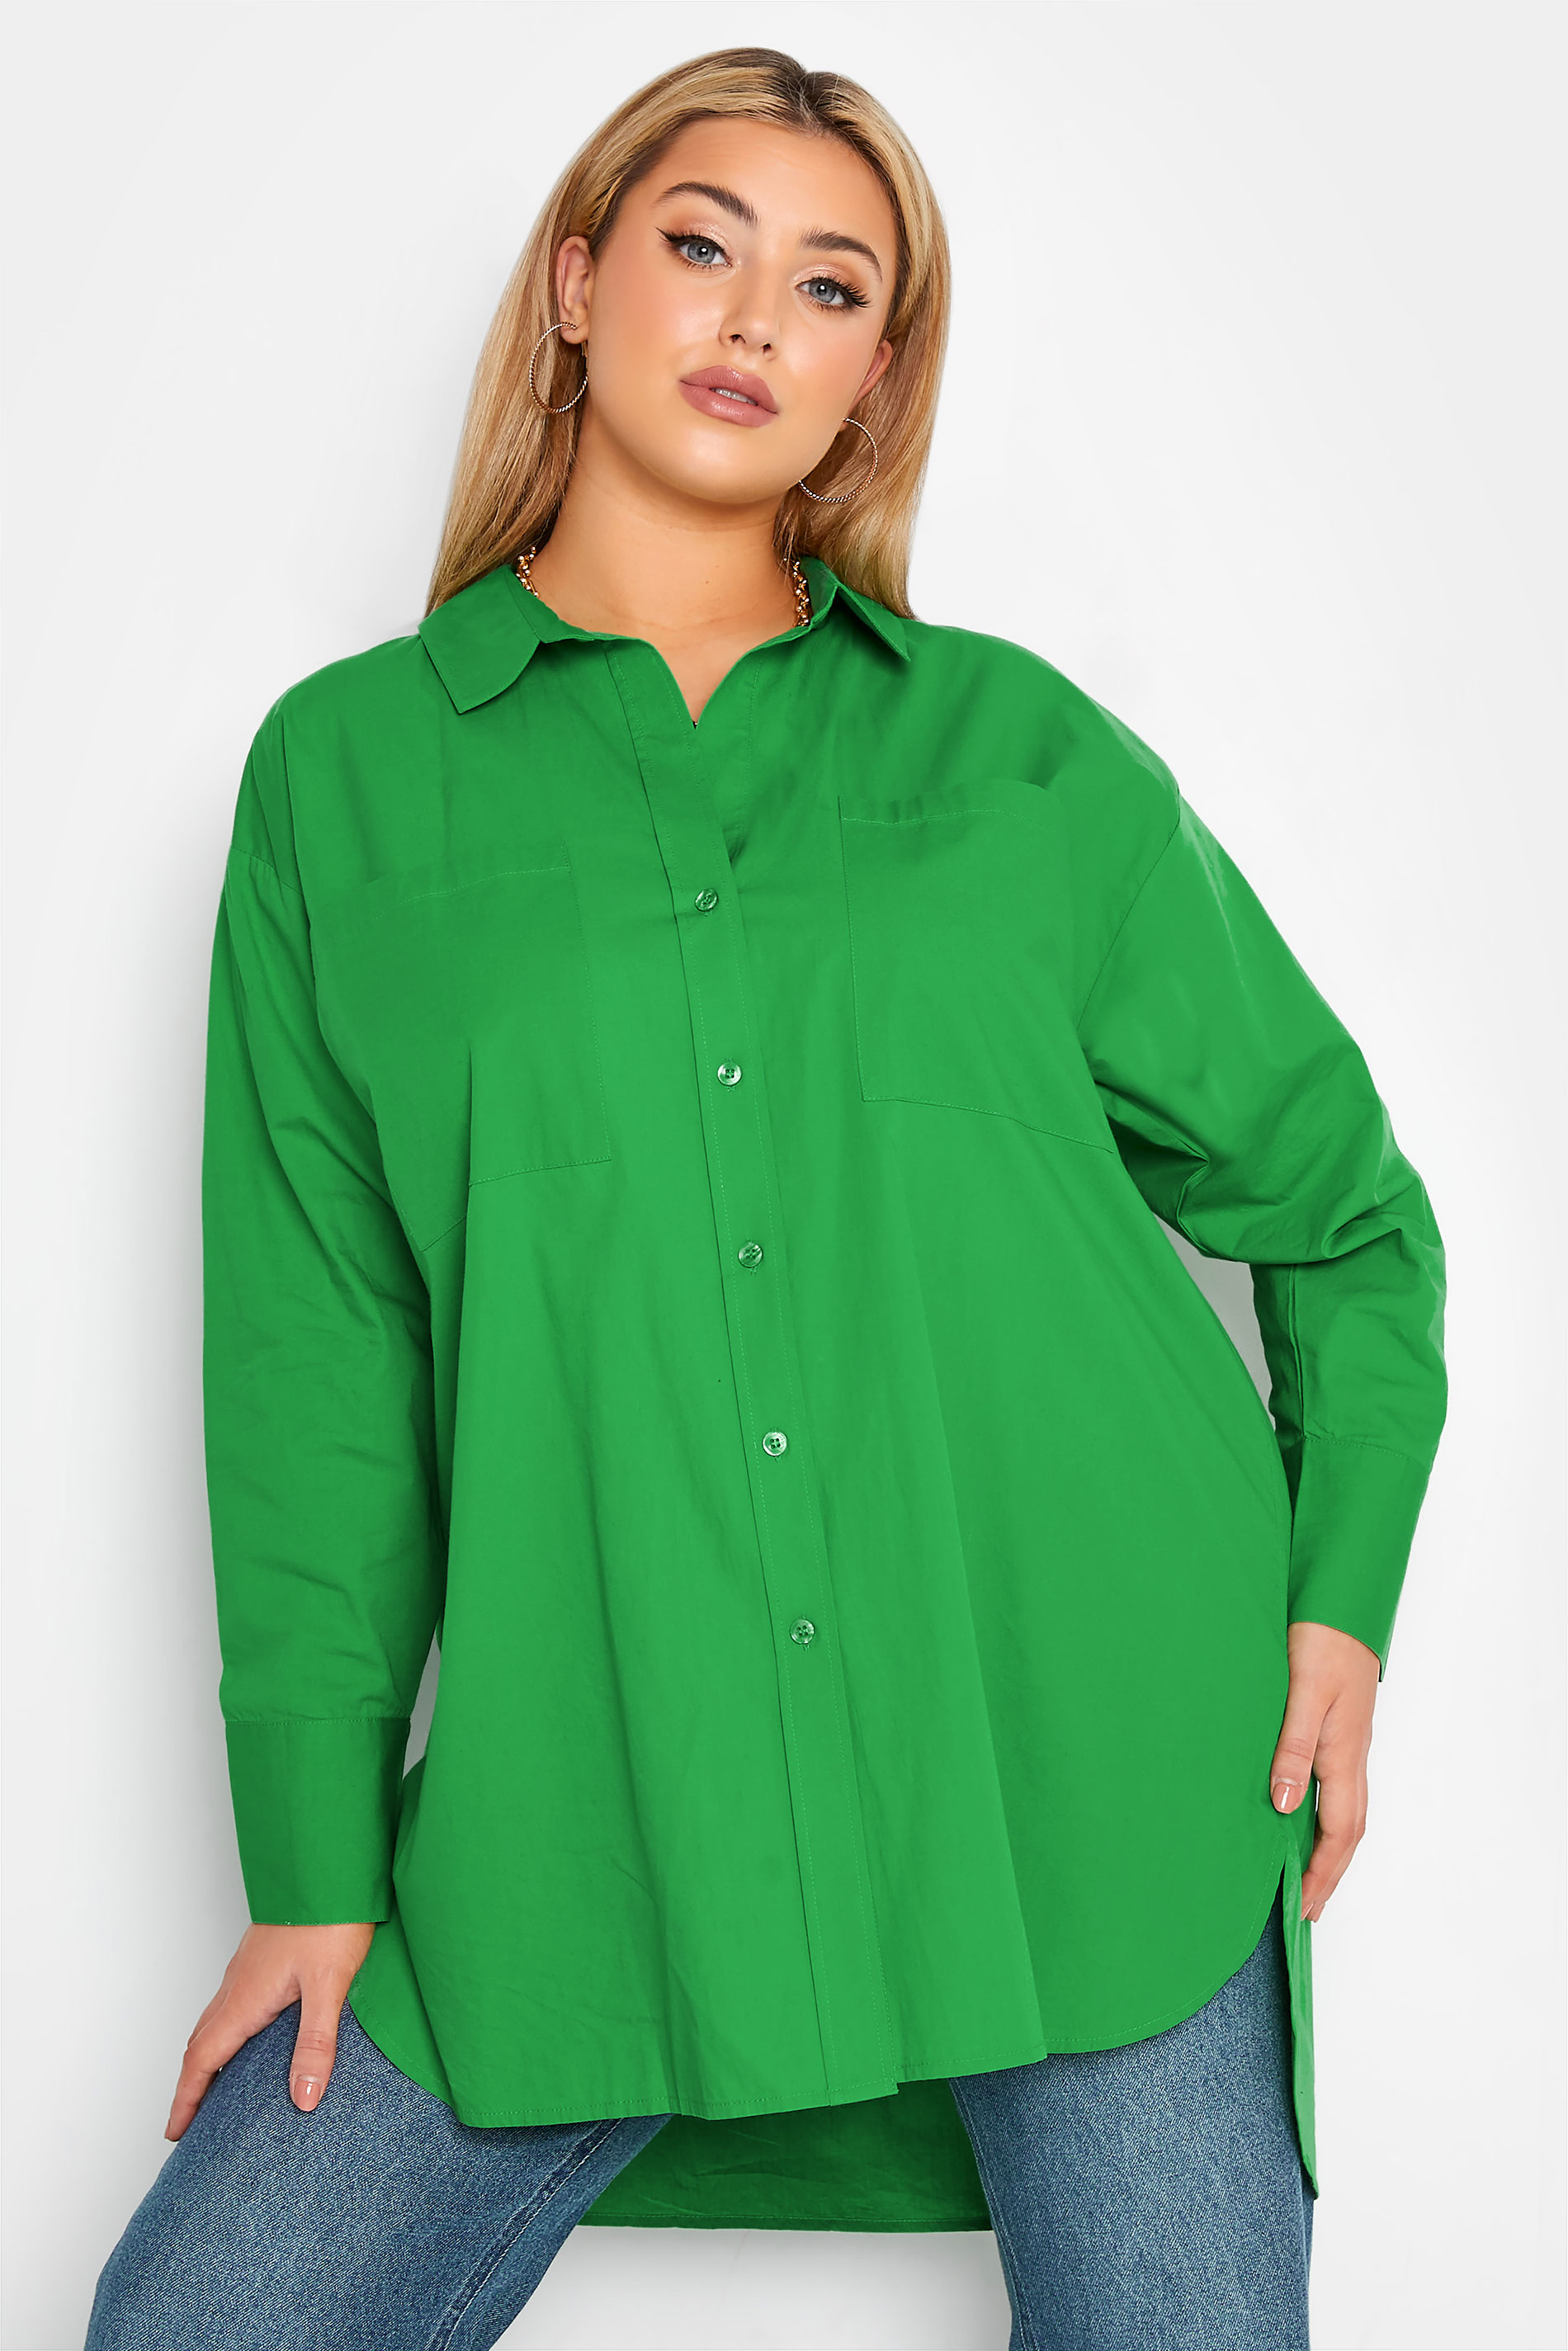 Grande taille  Blouses & Chemisiers Grande taille  Chemisiers | LIMITED COLLECTION - Chemisier Vert Oversize Boyfriend - UC40595